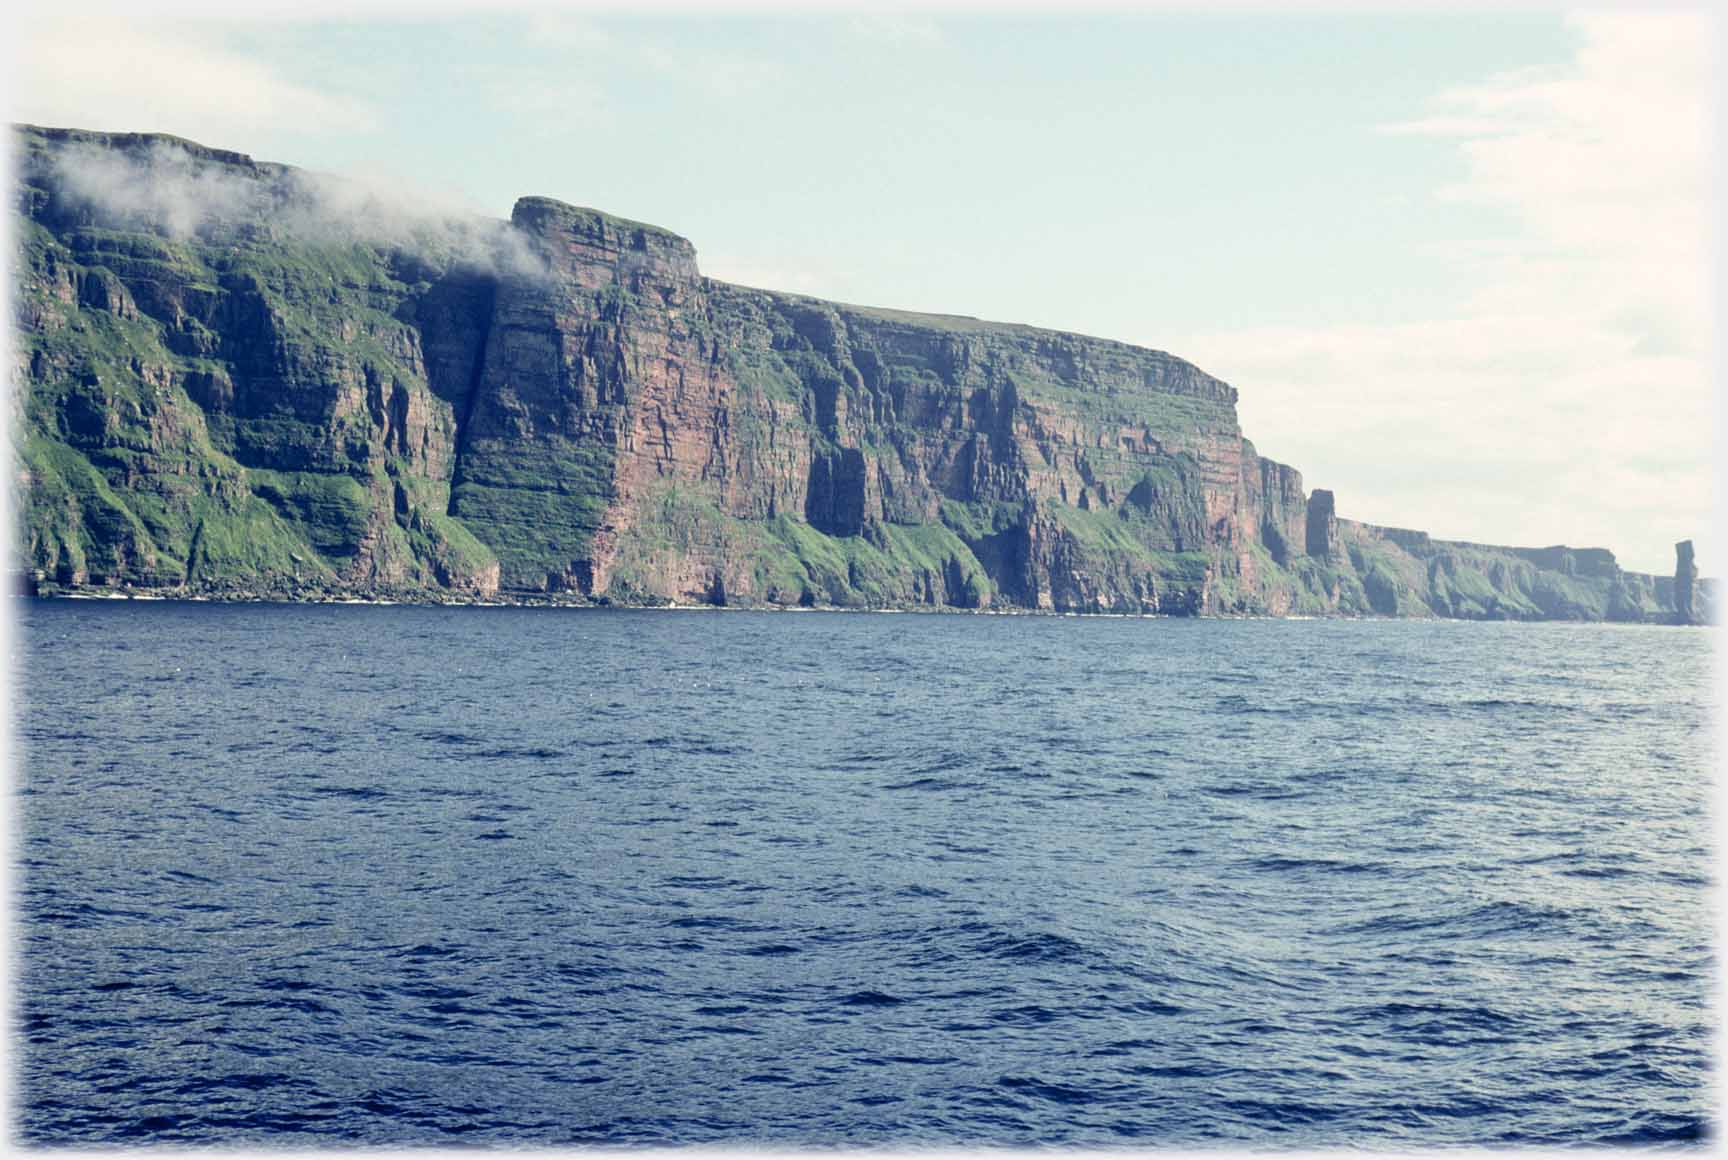 Looking along the length of the cliffs with the Old Man of Hoy at the end of the range.